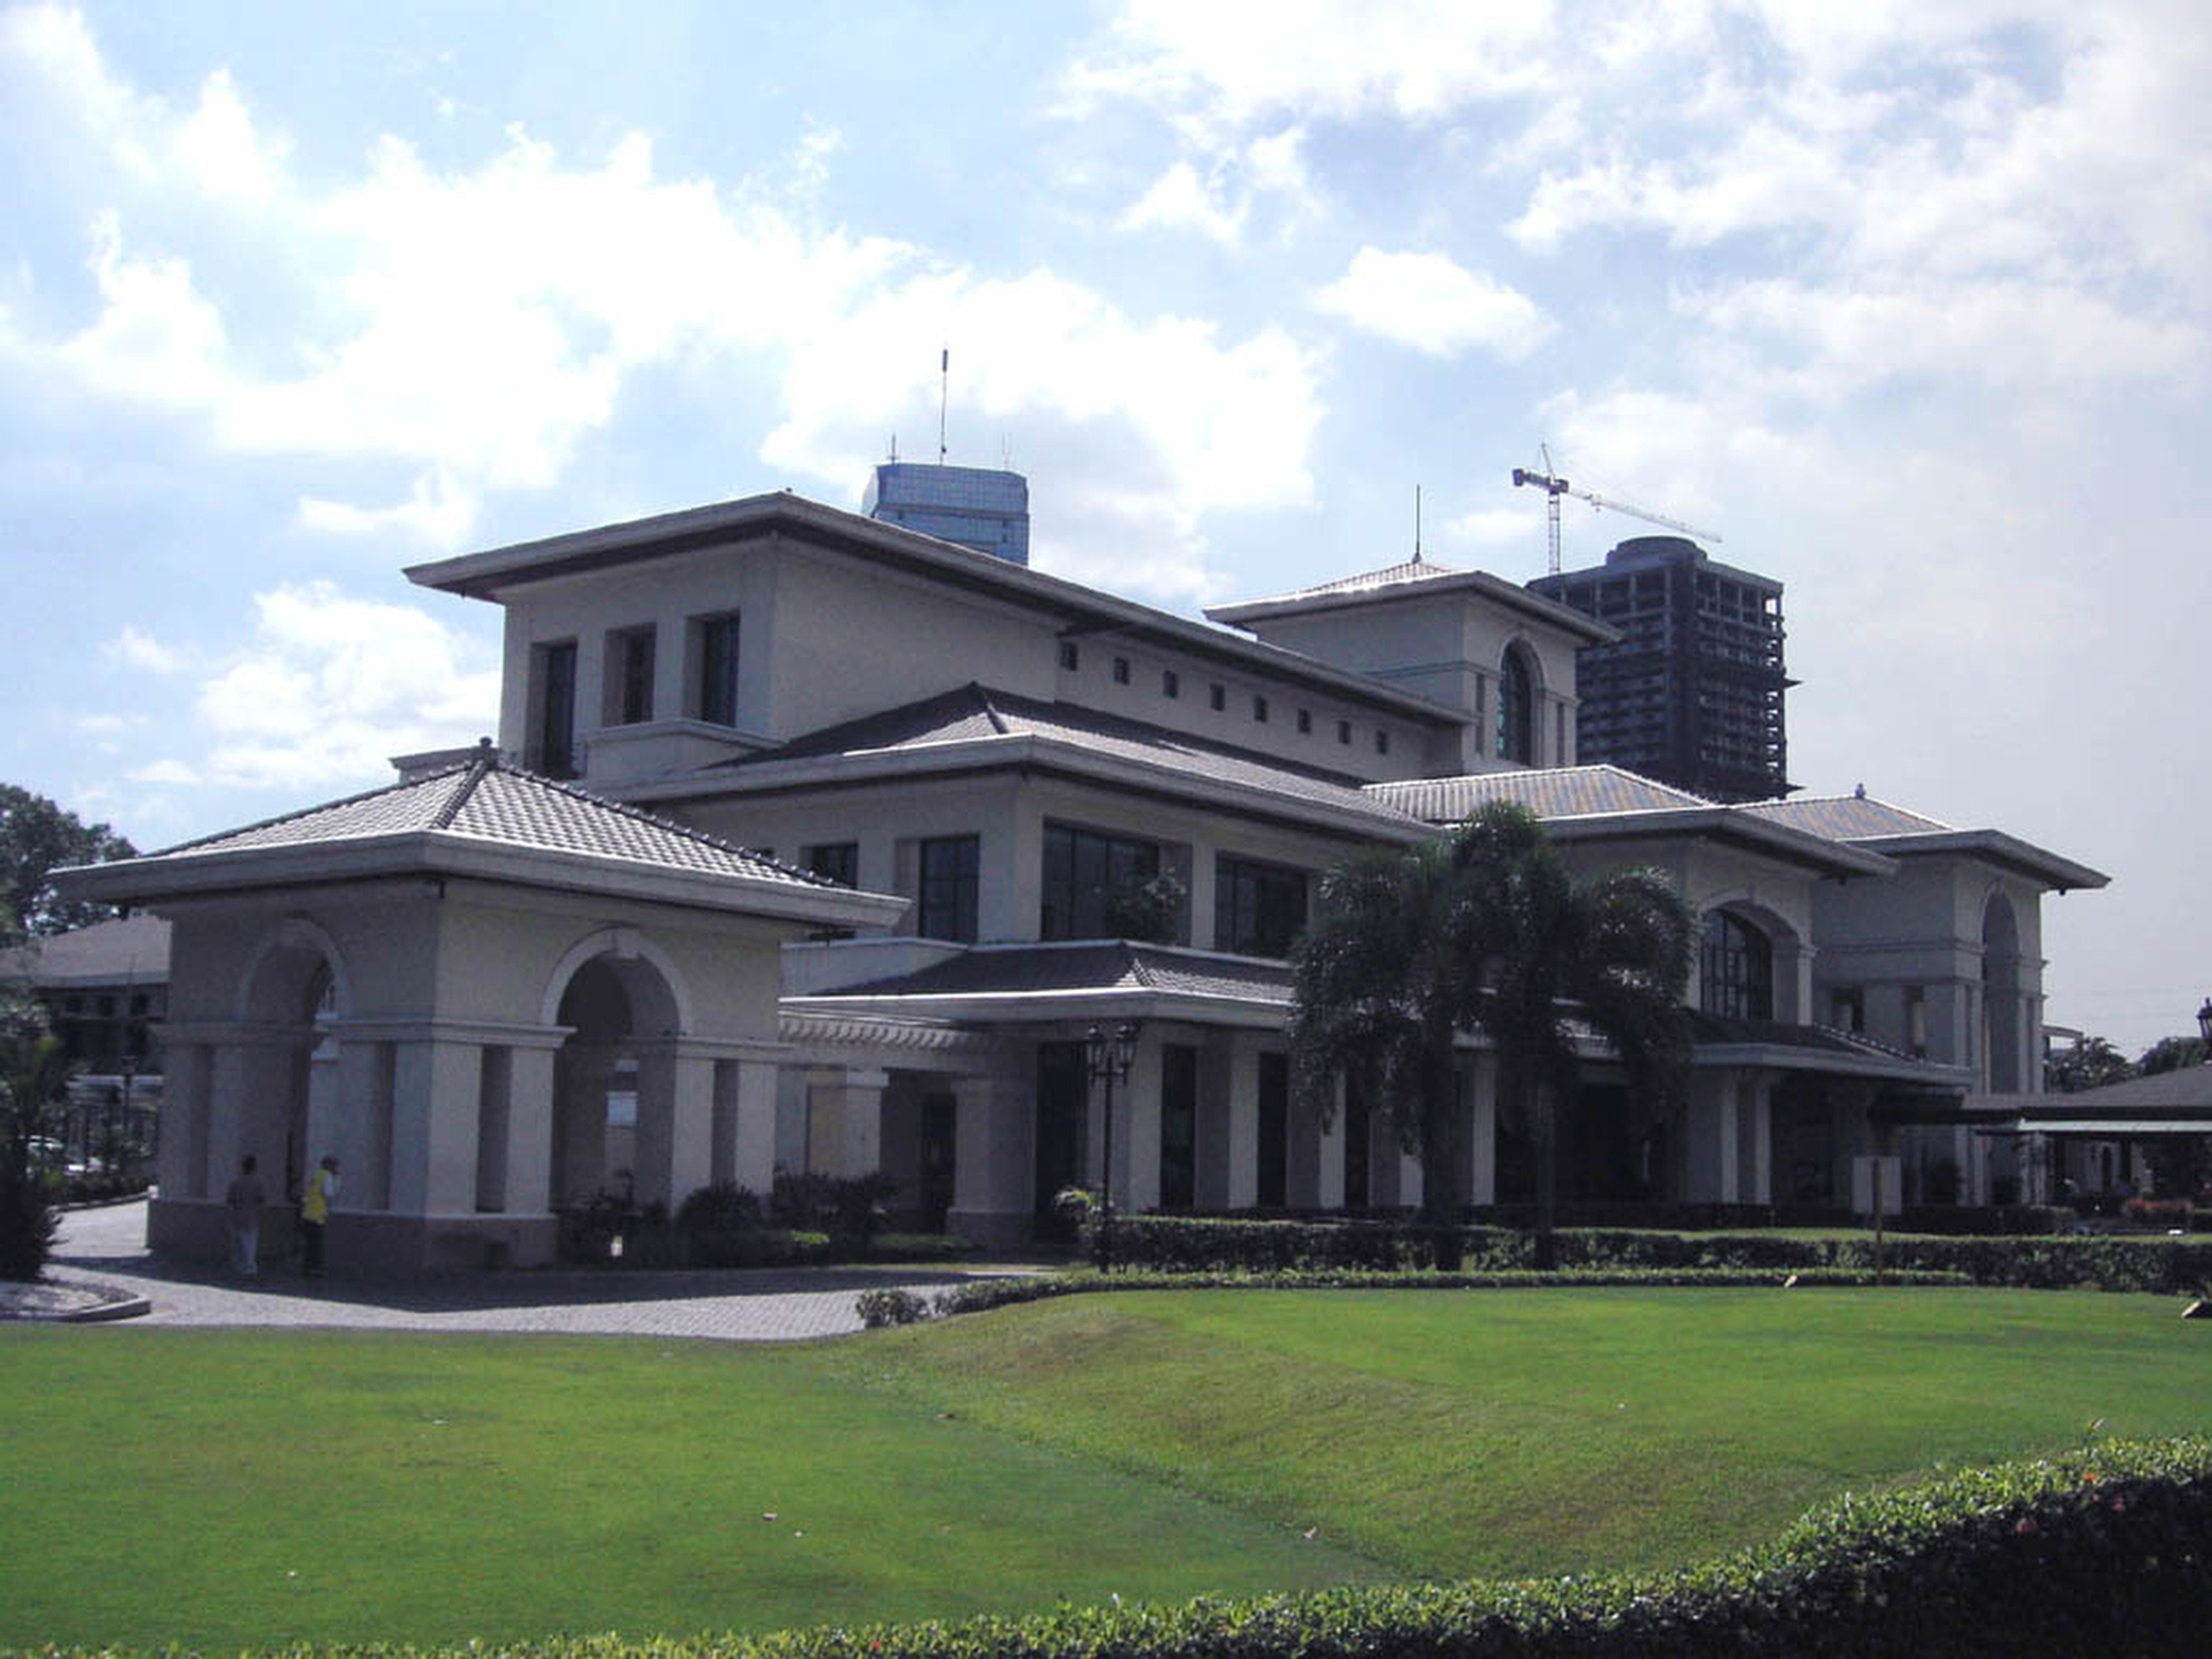 Wack Wack Golf and Country Club, one of the oldest golf clubs in the Philippines, boasts two 18-hole championship courses in the Philippines. Photo: Handout